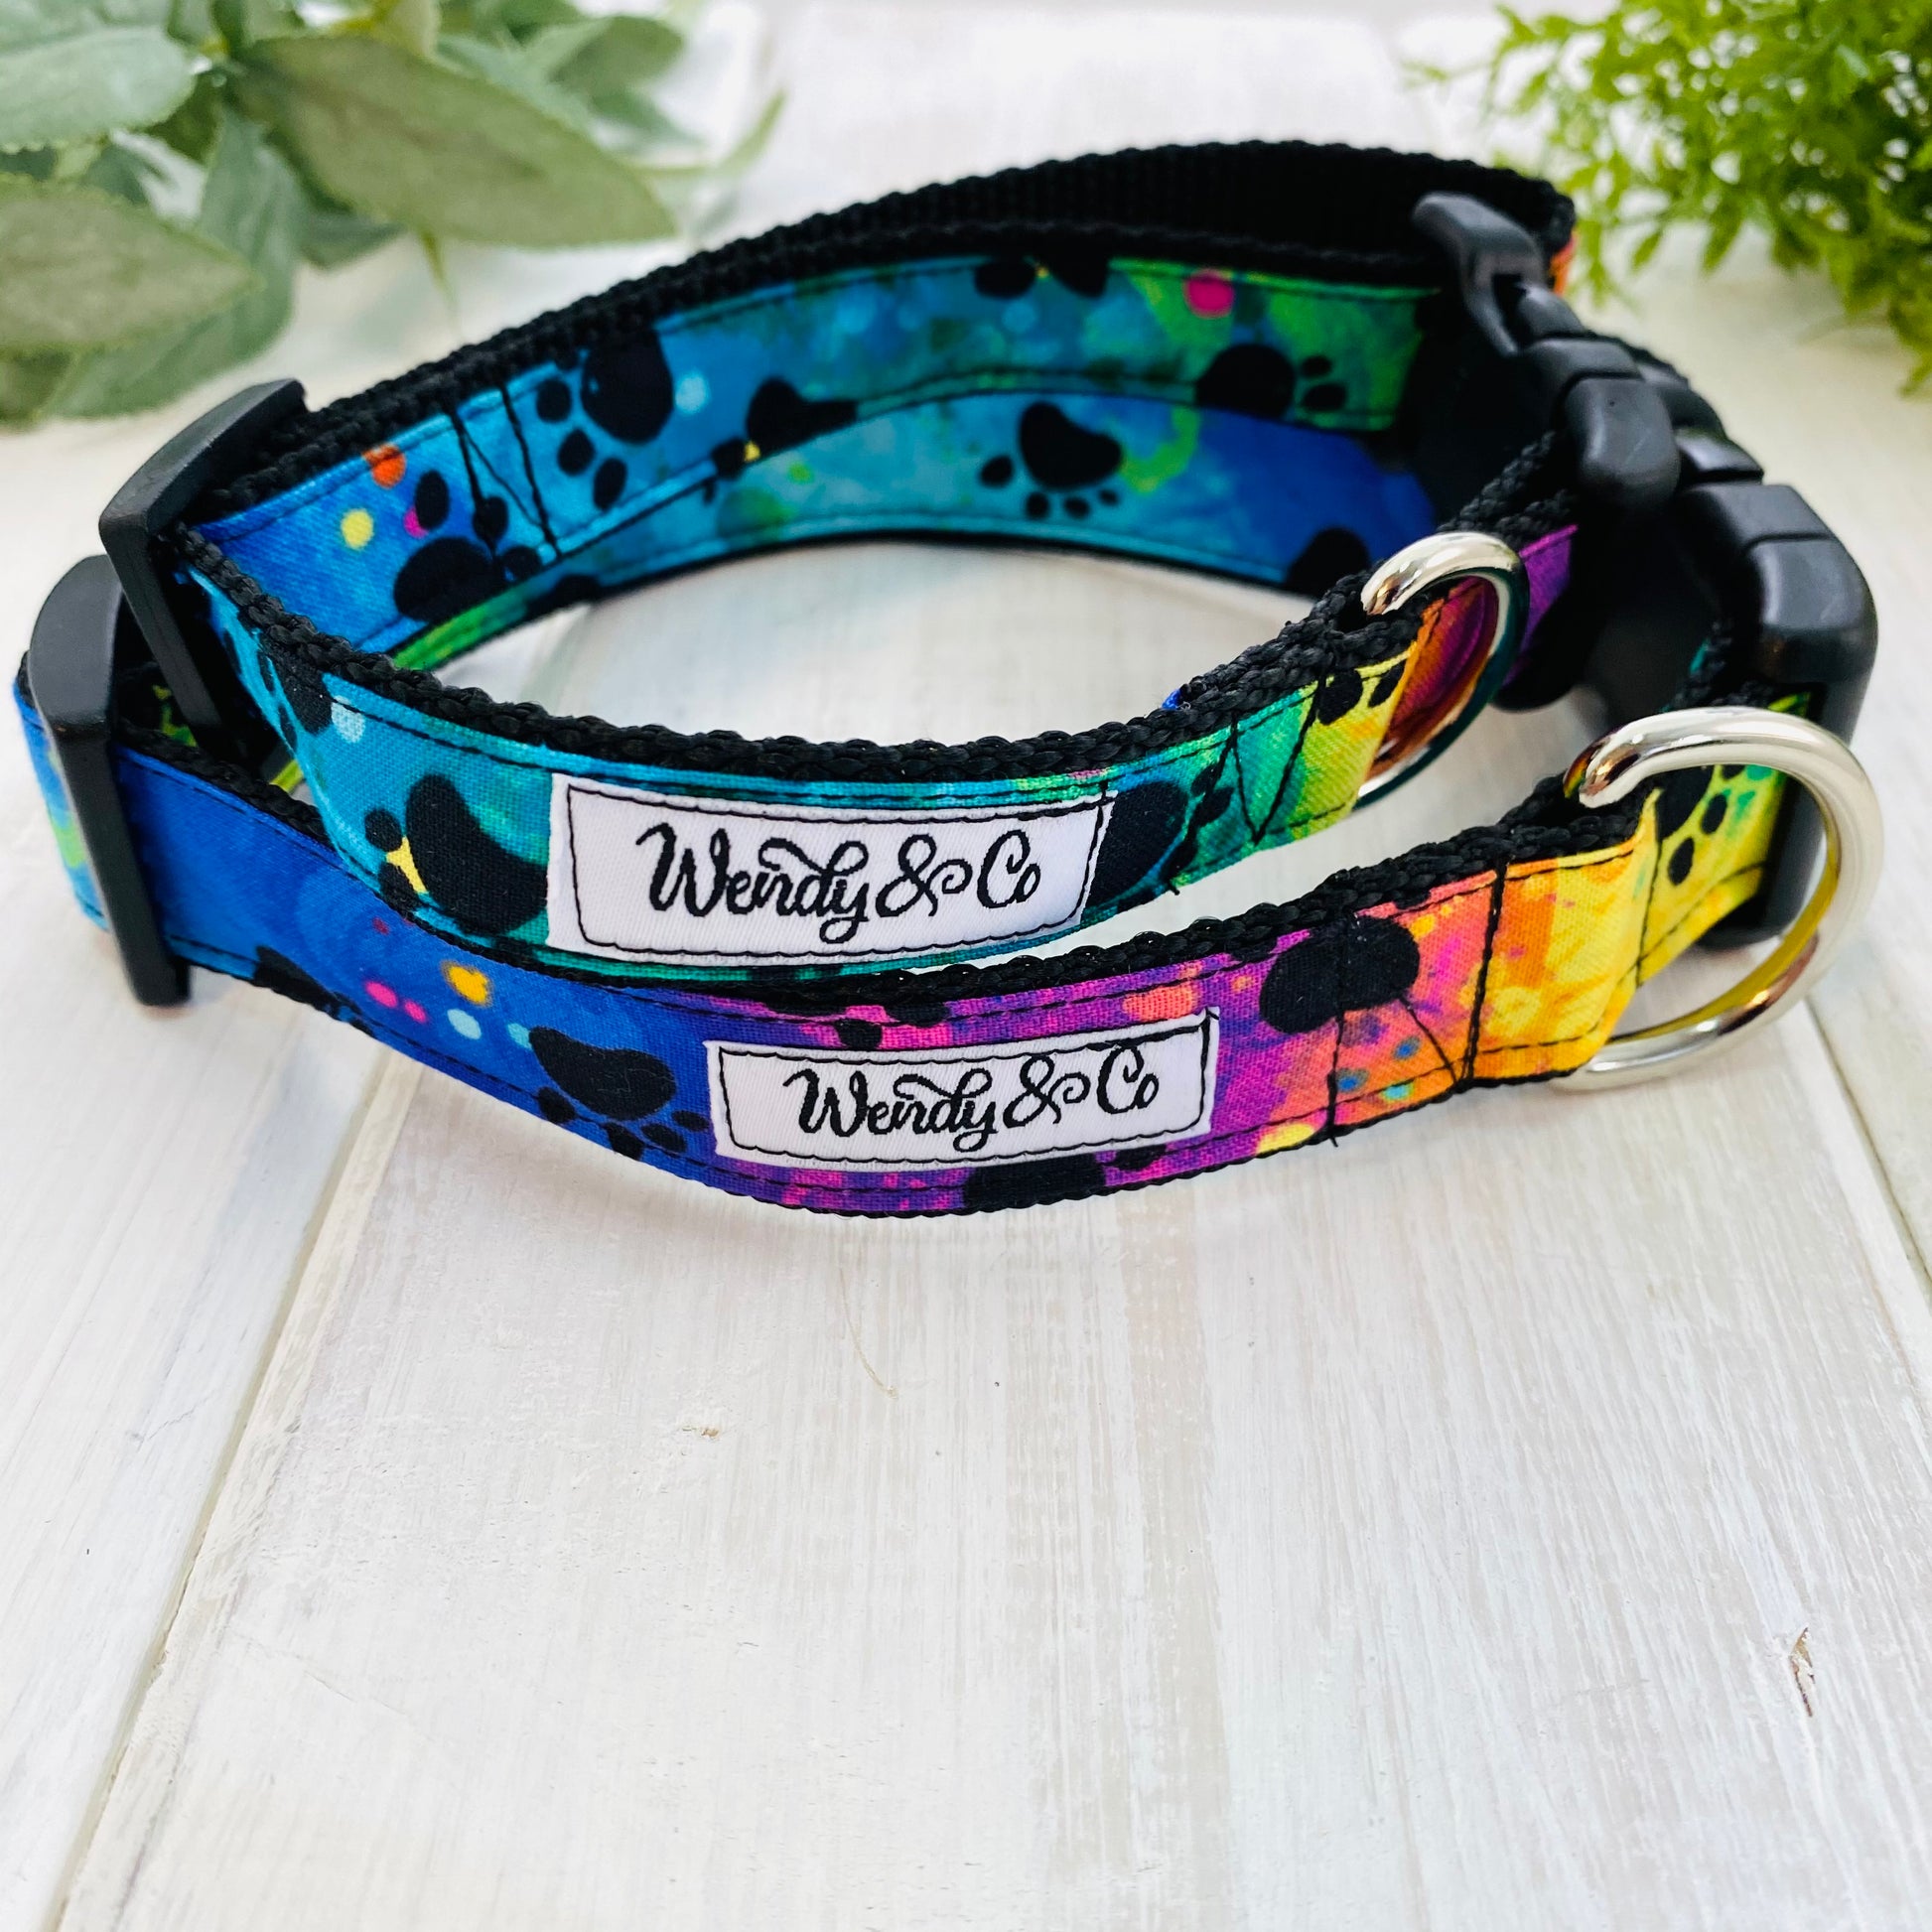 Dog collars small and medium in tie dye pattern with black paw prints.